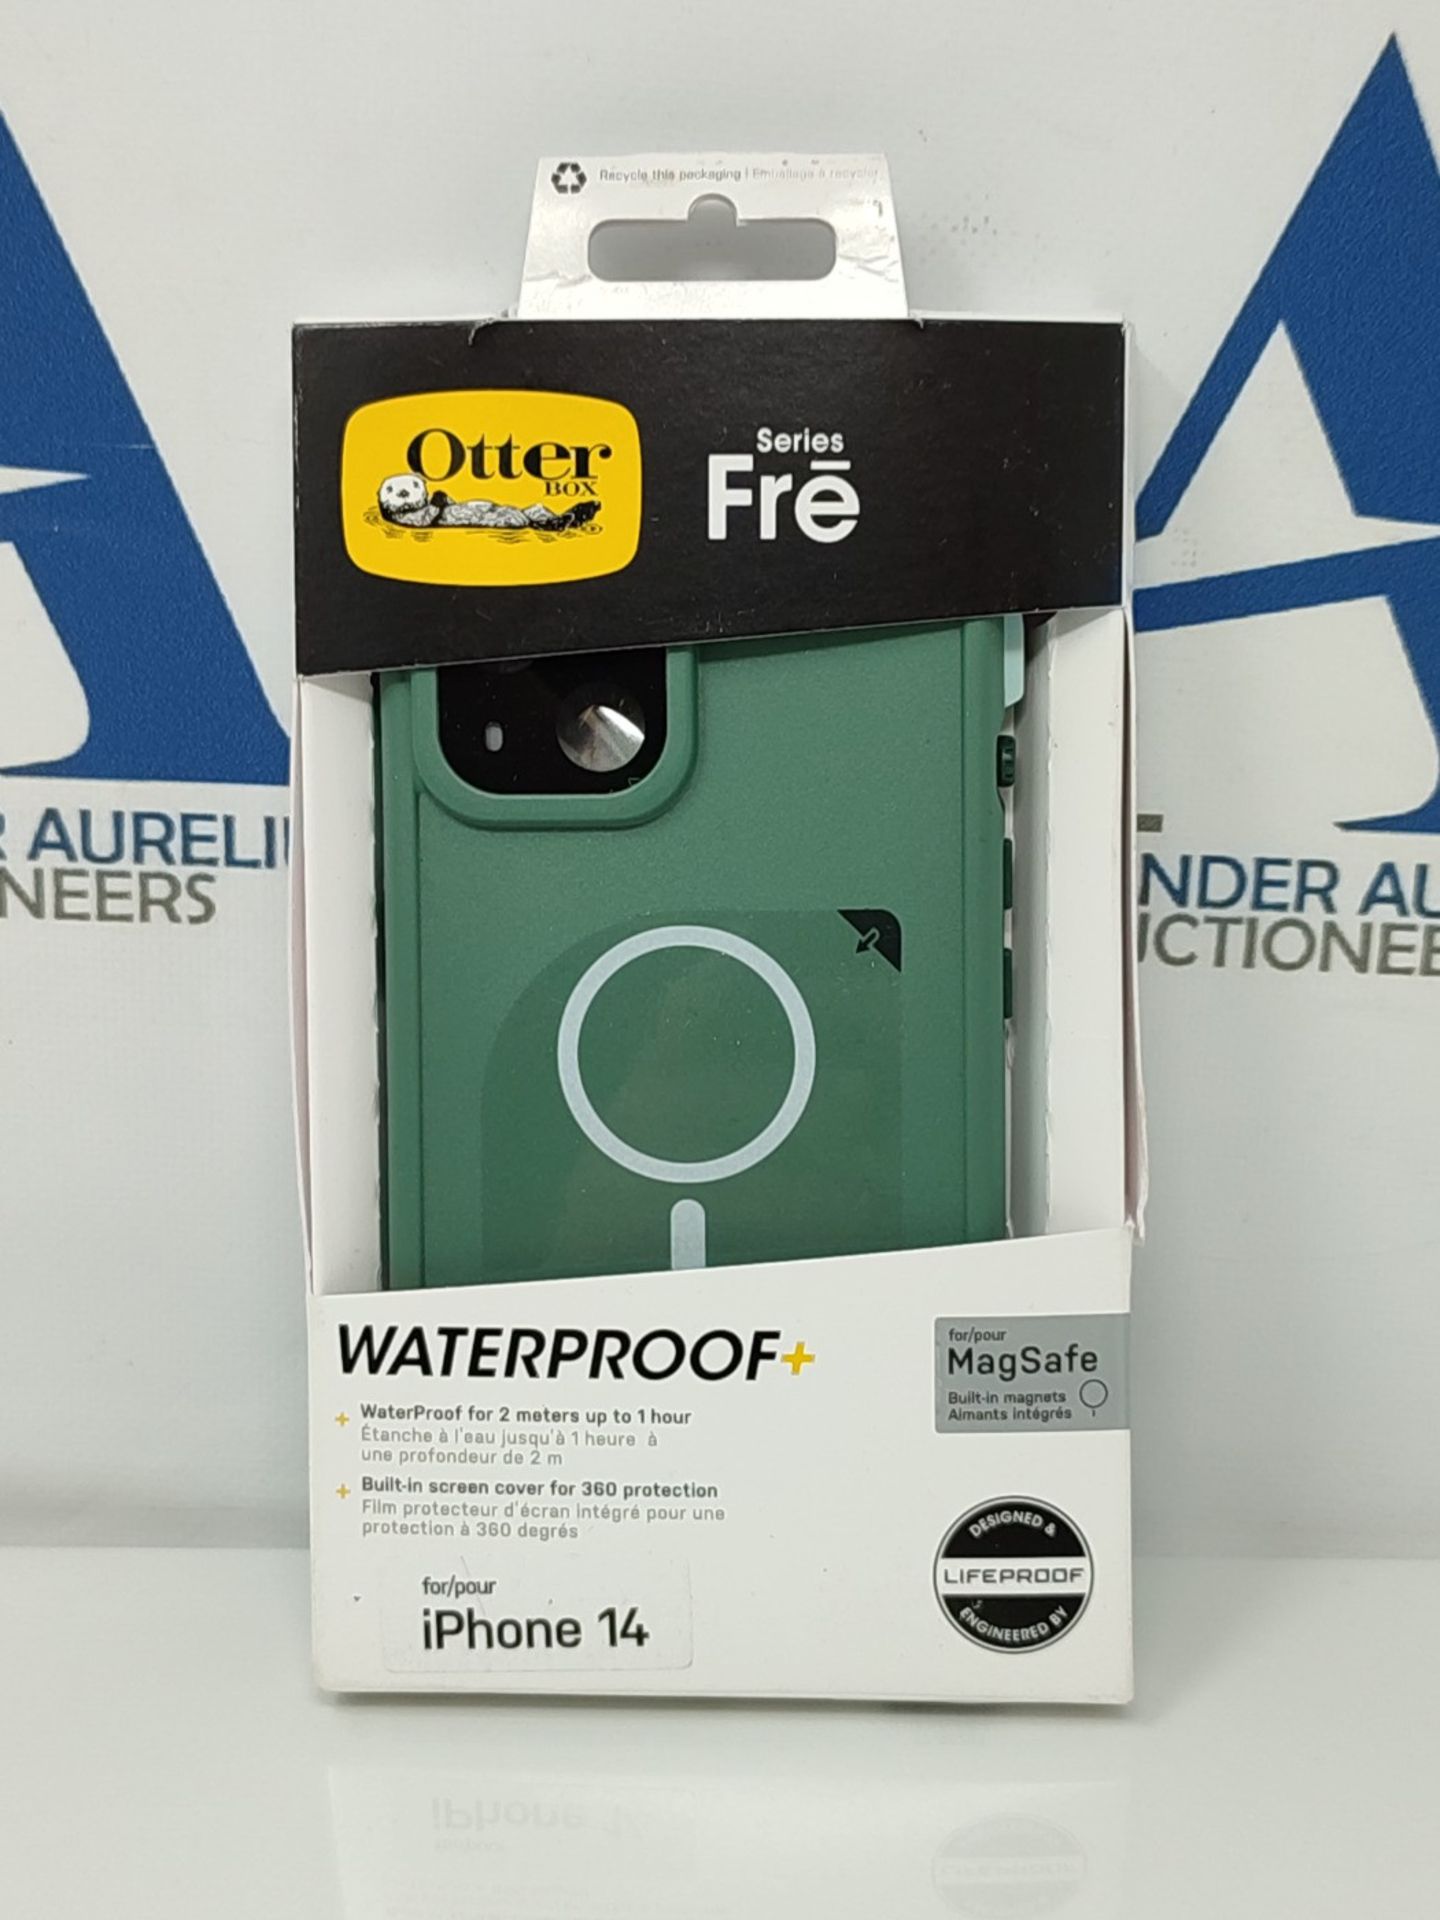 RRP £79.00 OtterBox Fre Case for iPhone 14 for MagSafe, Waterproof (IP68), Shockproof, Dirtproof, - Image 2 of 3